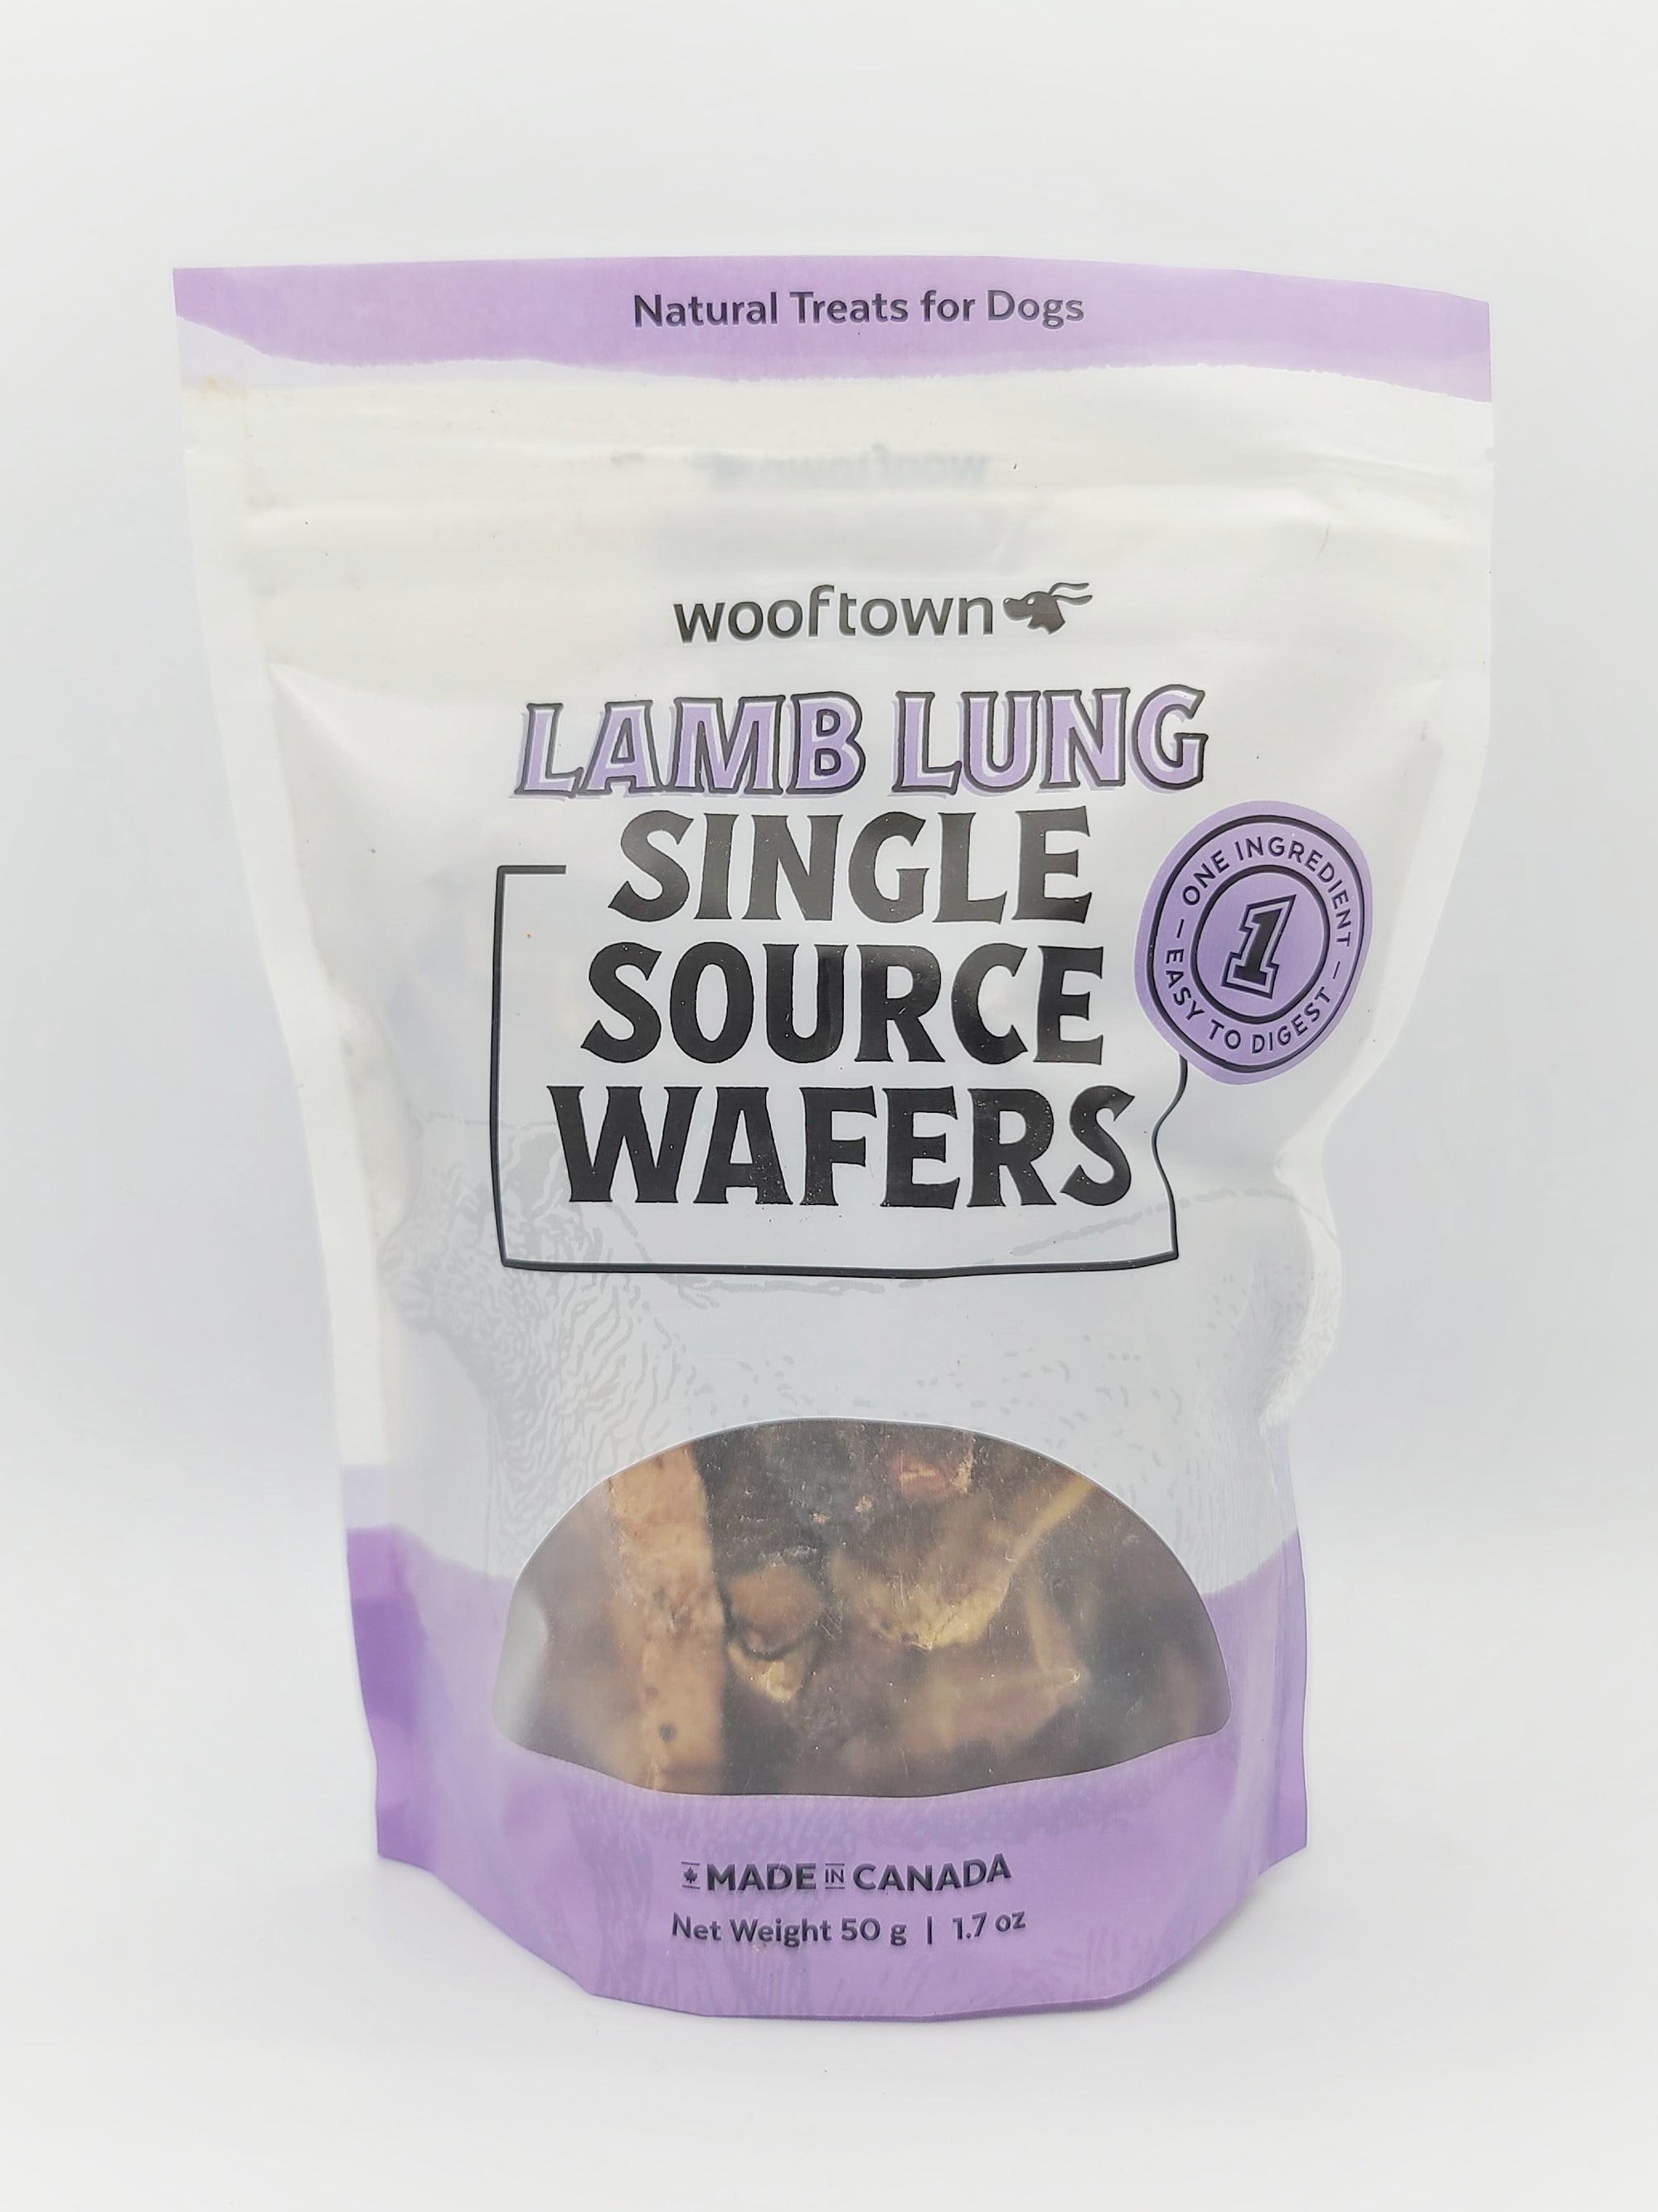 Wooftown HomeCooked Air Dried Lamb Lung Wafers Dog Treats (1.7oz/50g)